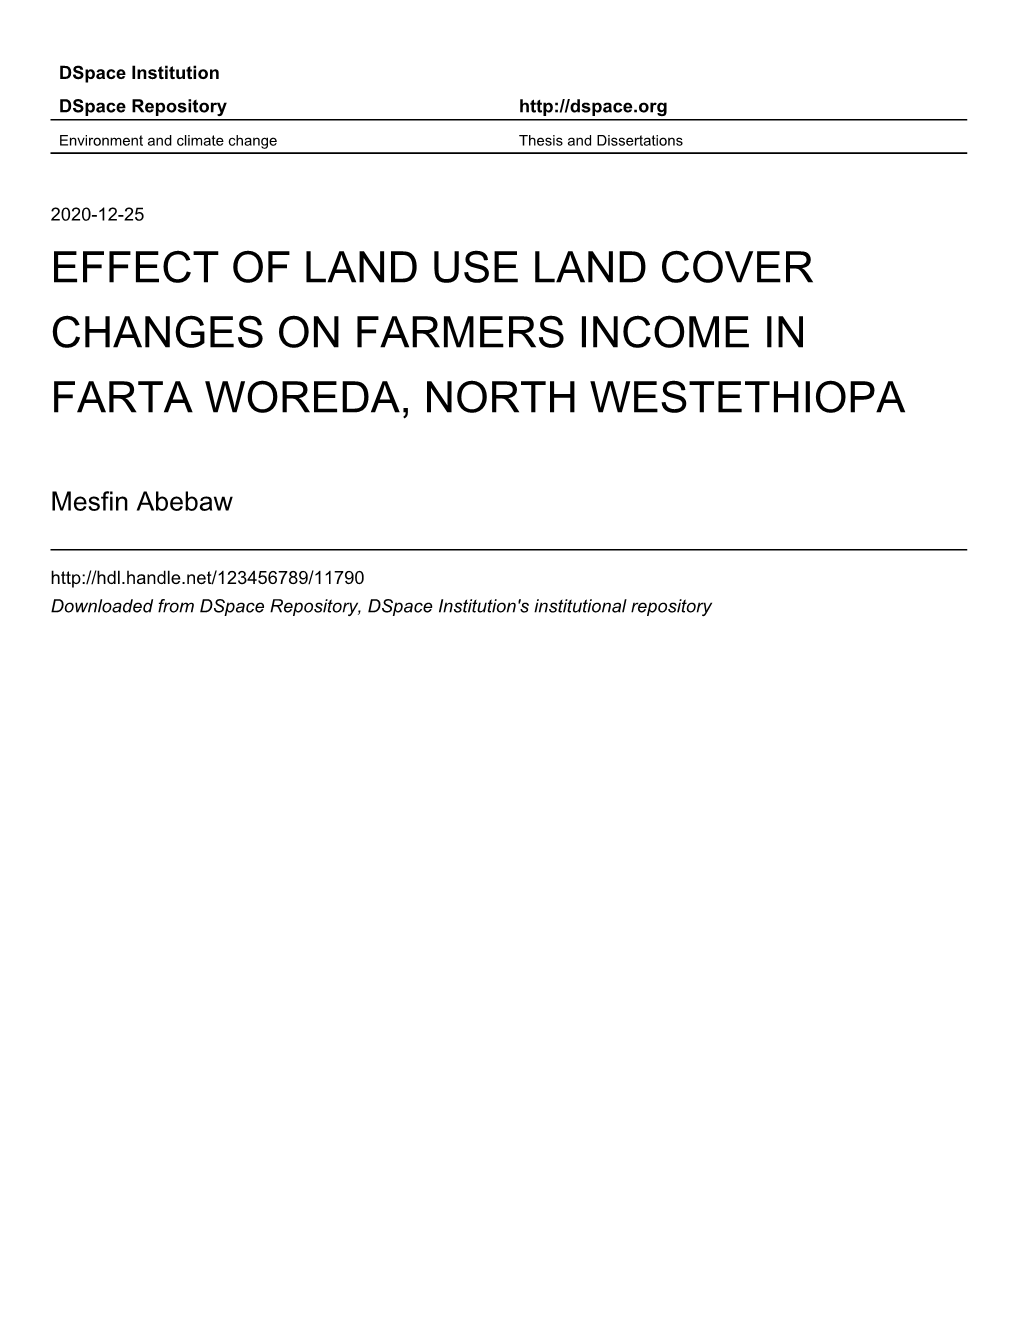 Effect of Land Use Land Cover Changes on Farmers Income in Farta Woreda, North Westethiopa